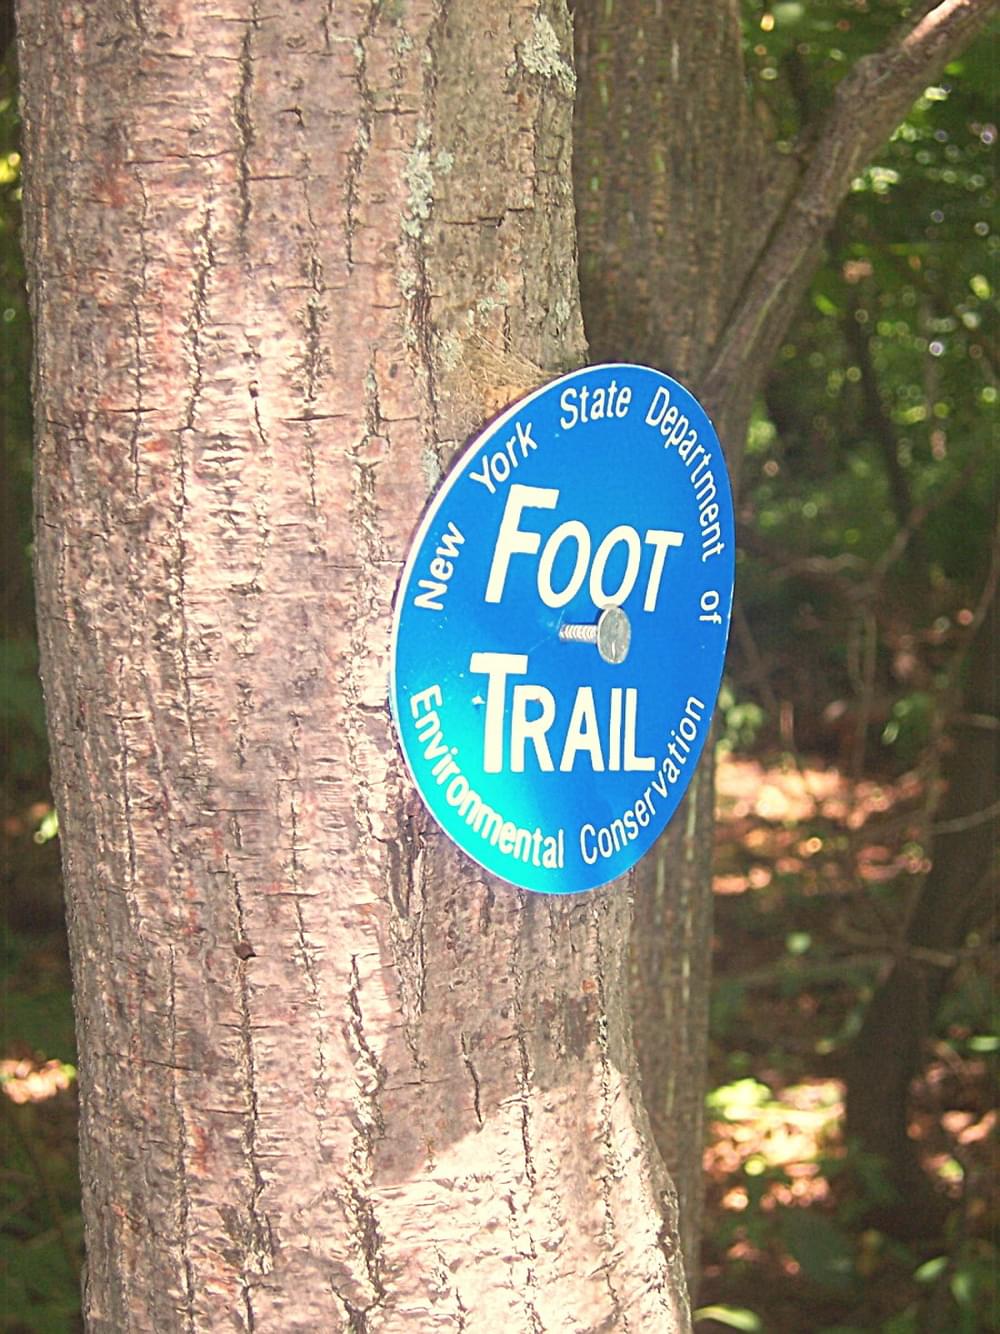 An official NYSDEC marker in Catskill Park. Note protruding nail to allow for tree growth.